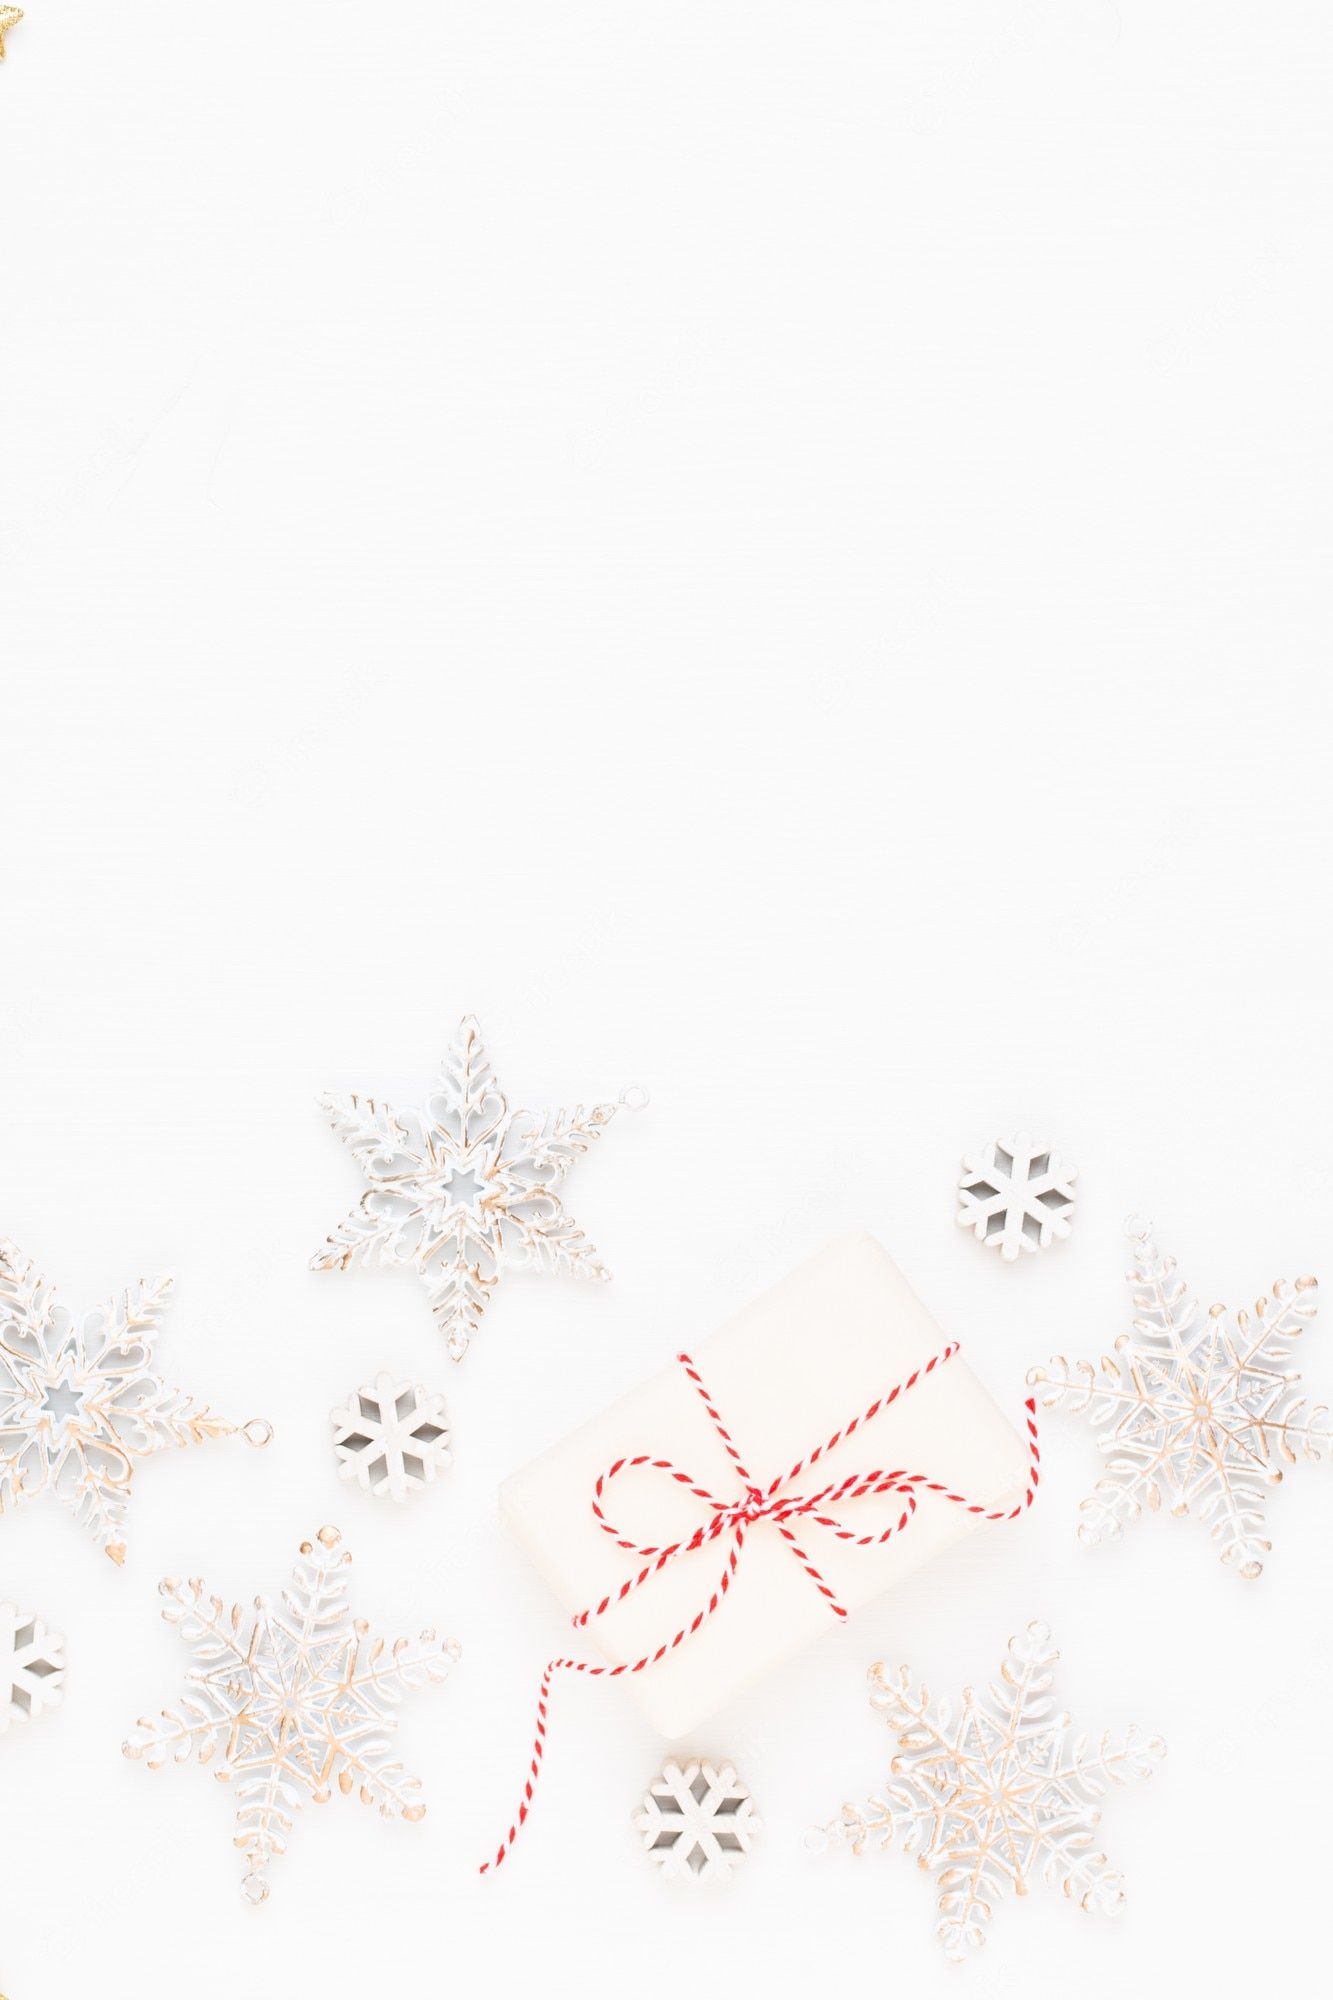 A christmas card with snowflakes and ribbon - White Christmas